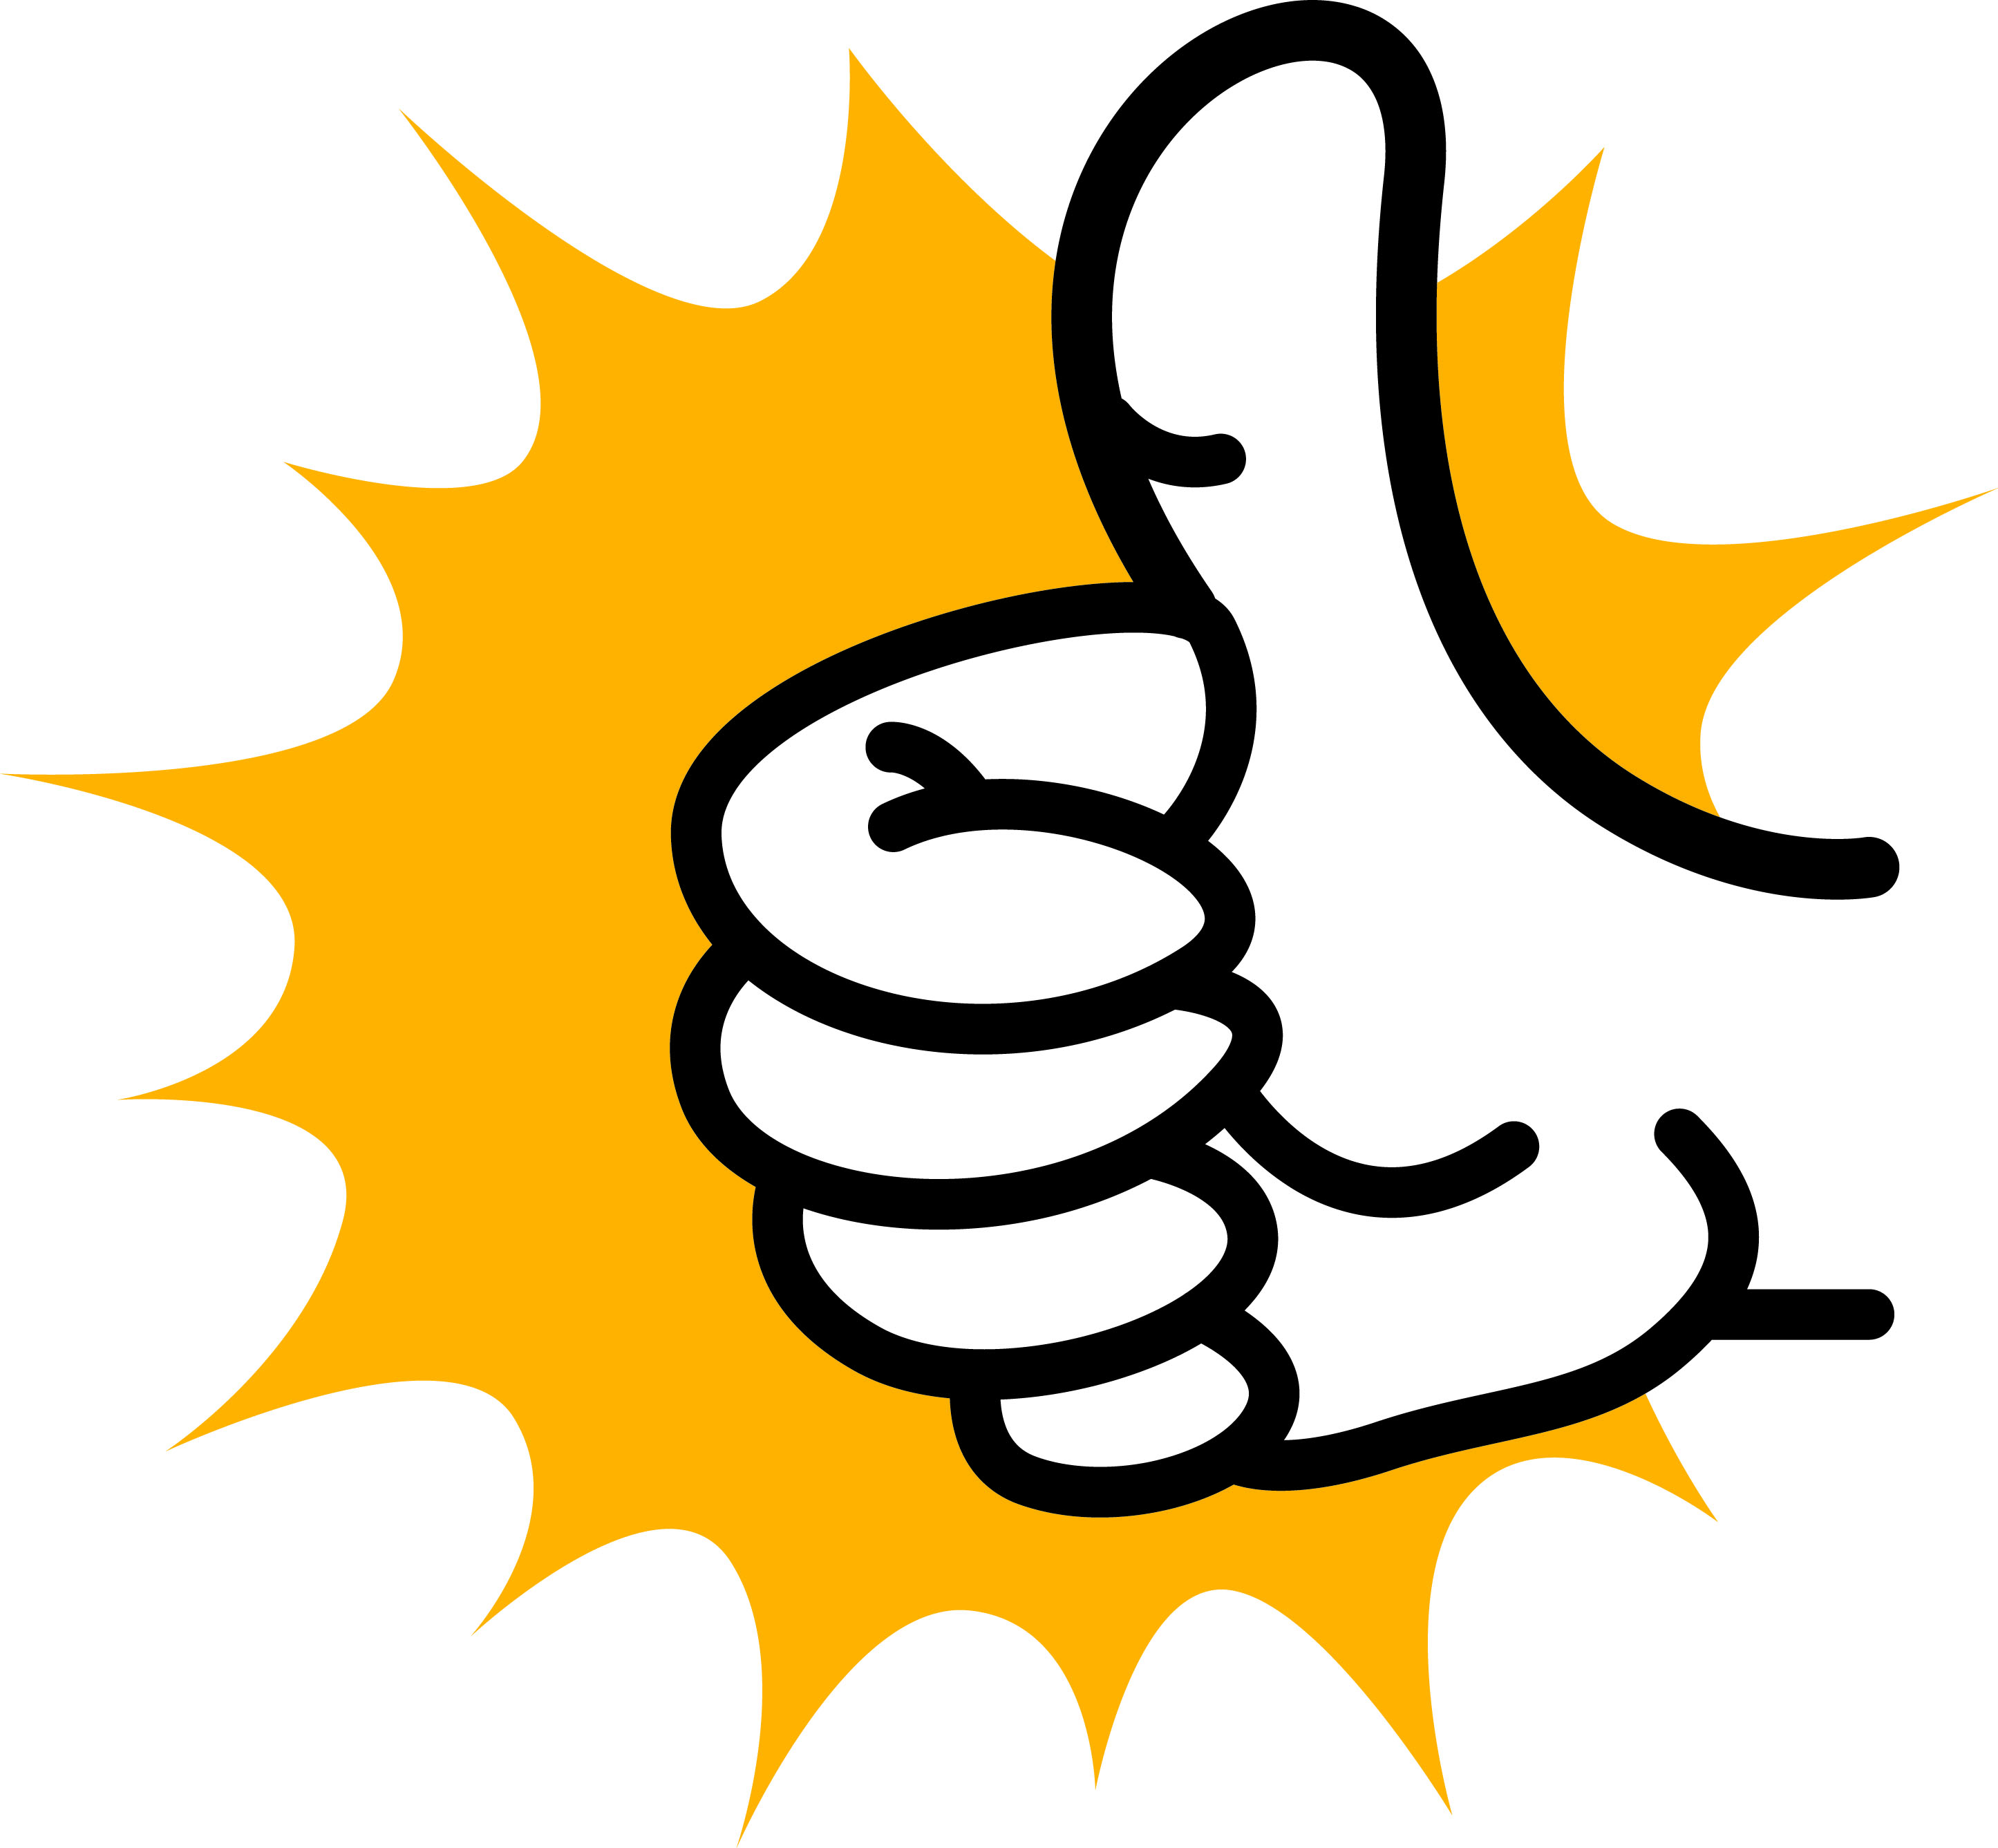 Free Thumbs Up Images, Download Free Clip Art, Free Clip Art